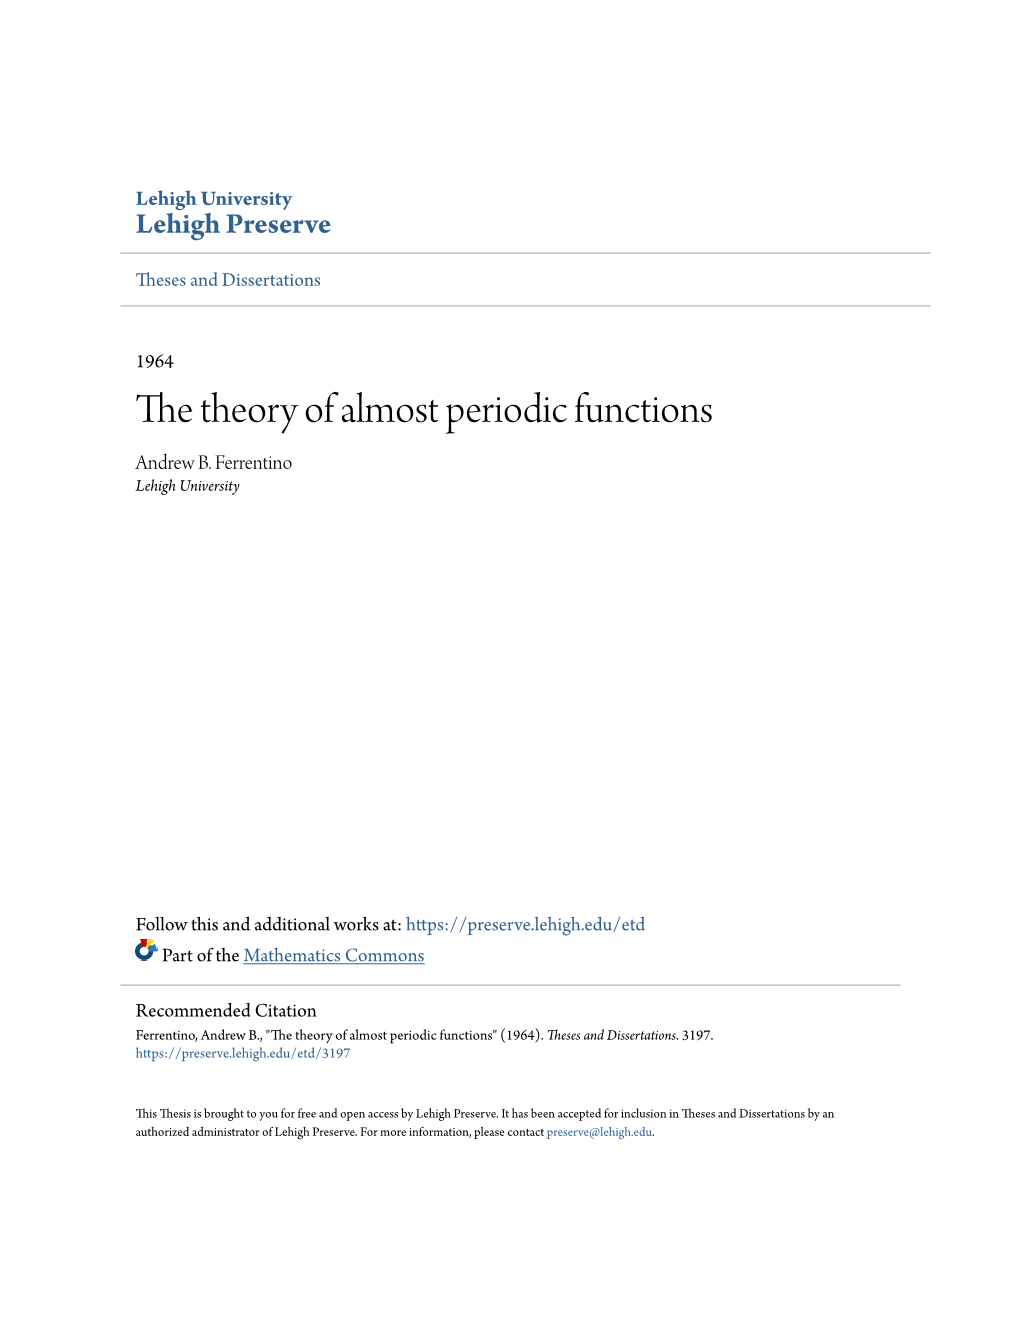 The Theory of Almost Periodic Functions Andrew B